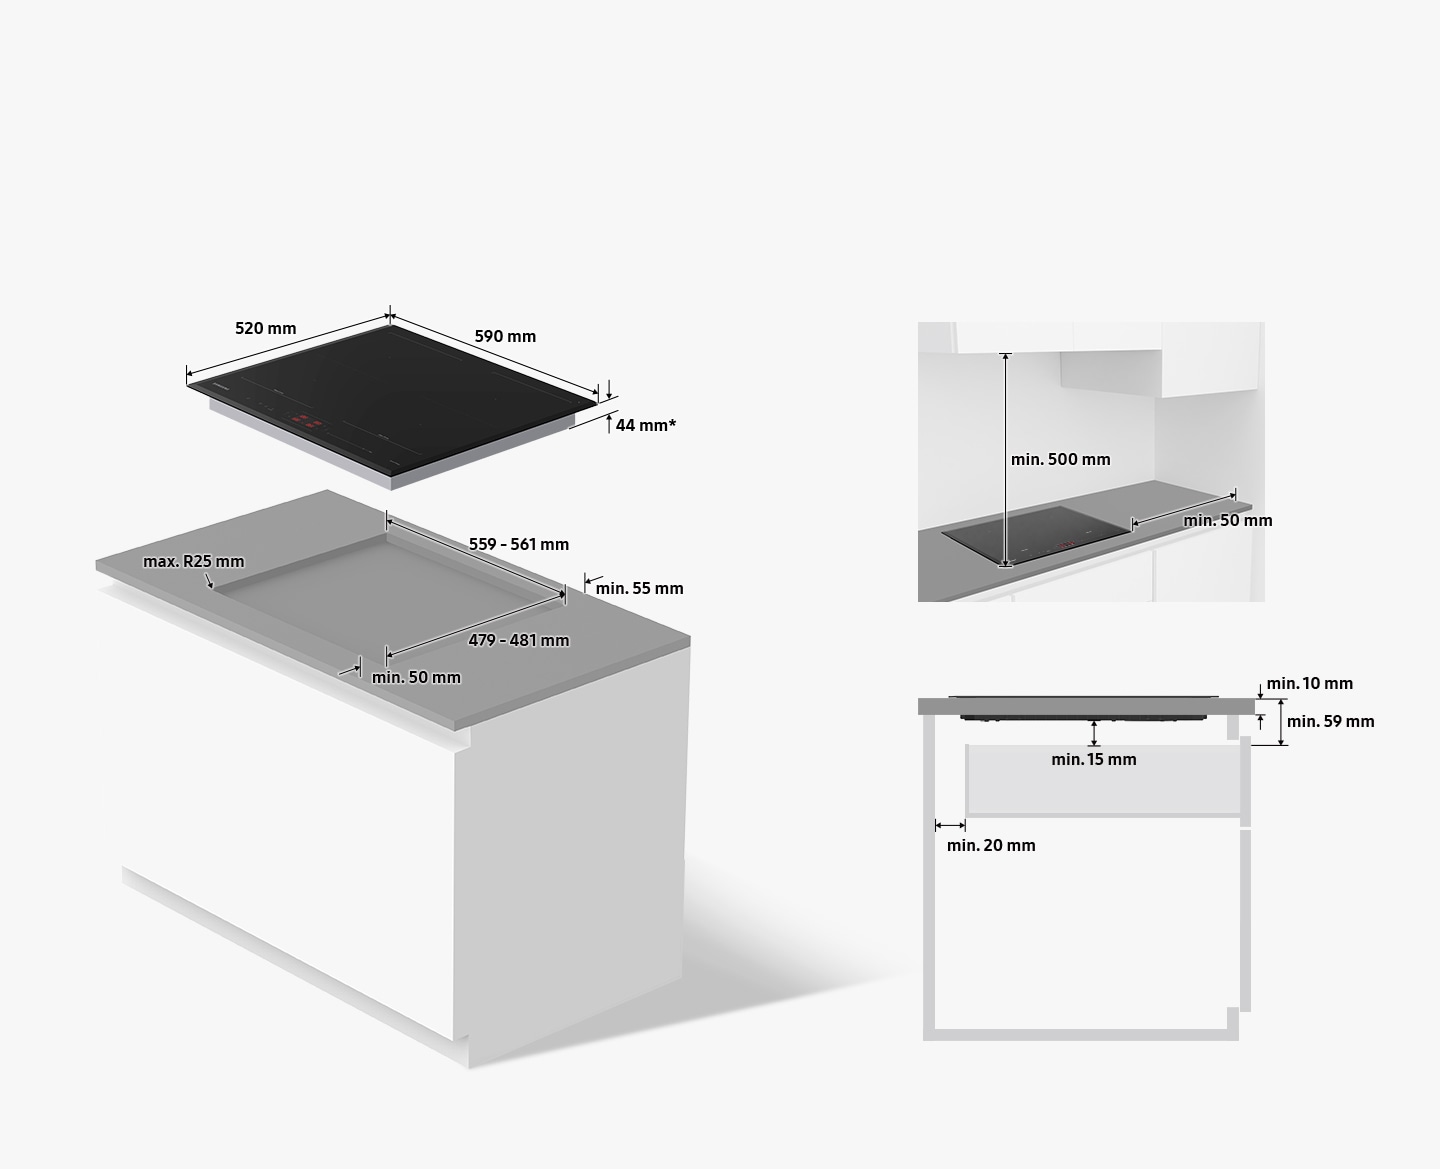 The cooktop measures 590mm wide, 520mm deep, and 44mm* high. The 44mm height must fit inside the countertop cutout. Countertop cutouts must be 559-561mm wide, 479-481mm deep, and less than R25mm round corners. There must be at least 55mm of uncut space on the back of the cutout and at least 50mm of uncut space on the front of the cutout. The minimum height of 15mm under the cooktop plus the minimum thickness of the countertop of 10mm must be at least 59mm. Drawers installed under the cooktop must be at least 20mm from the rear wall. When the cooktop is installed, there must be at least 500mm of space above the cooktop and at least 50mm to the right of the cooktop.